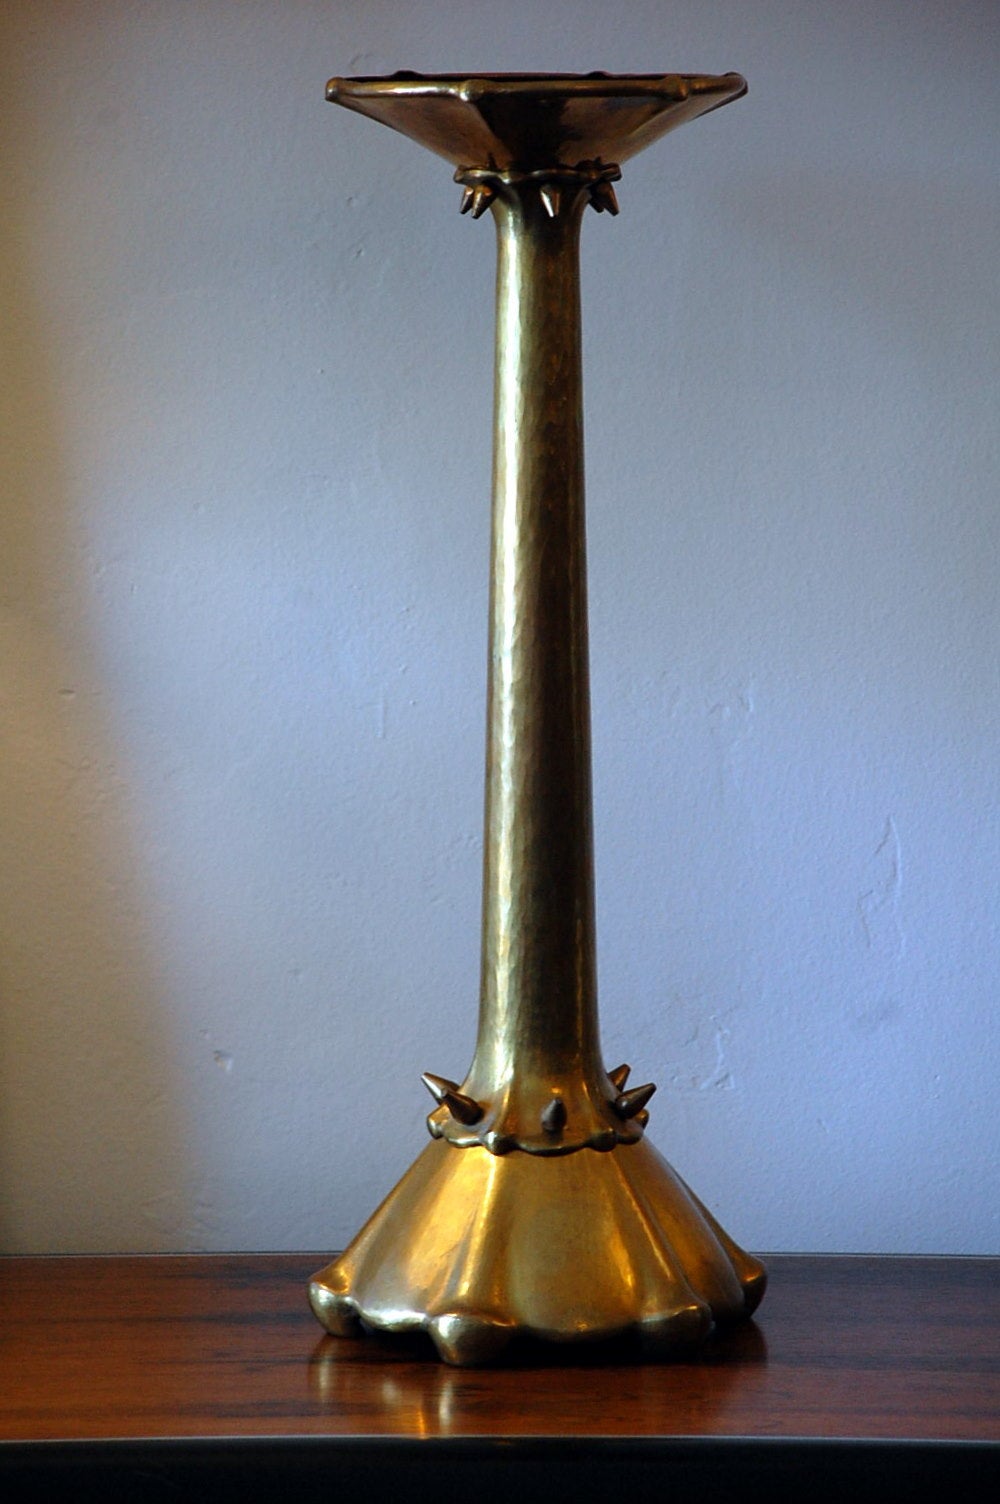 Rare Amsterdam School Hammered Brass Candlestick In Excellent Condition For Sale In Los Angeles, CA